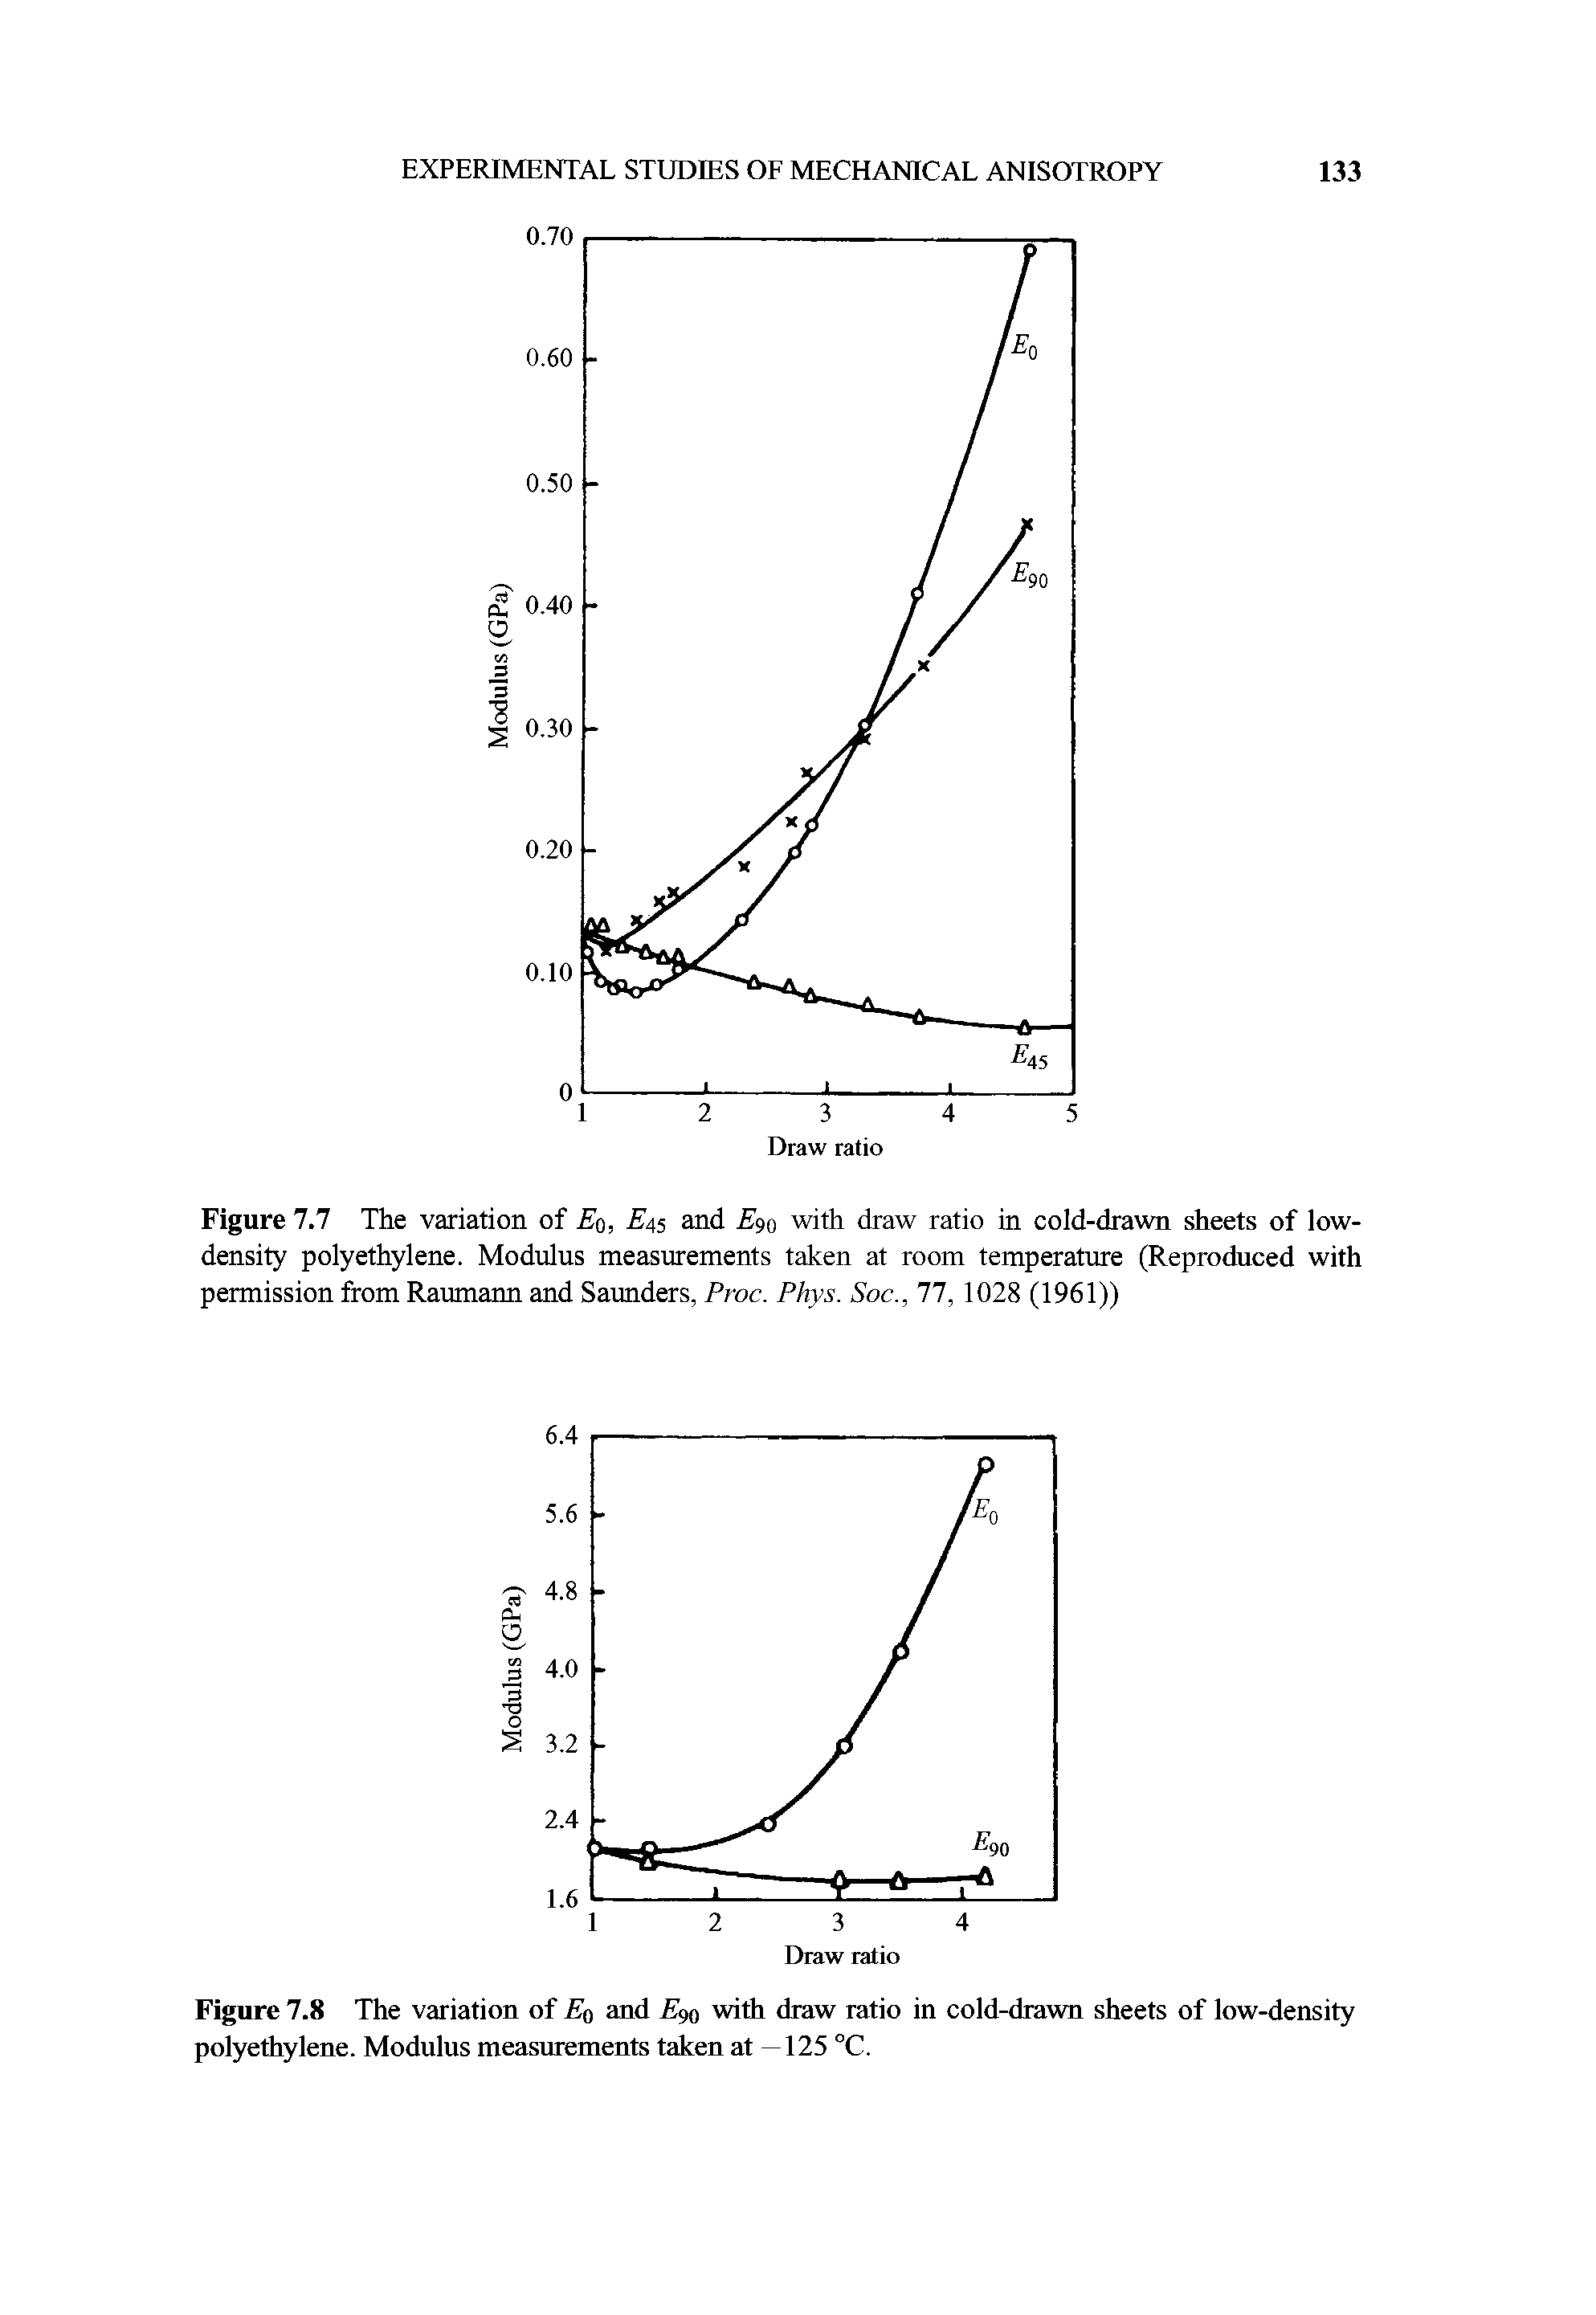 Figure 7.8 The variation of E, and E with draw ratio in cold-drawn sheets of low-density polyethylene. Modulus measurements taken at —125 °C.